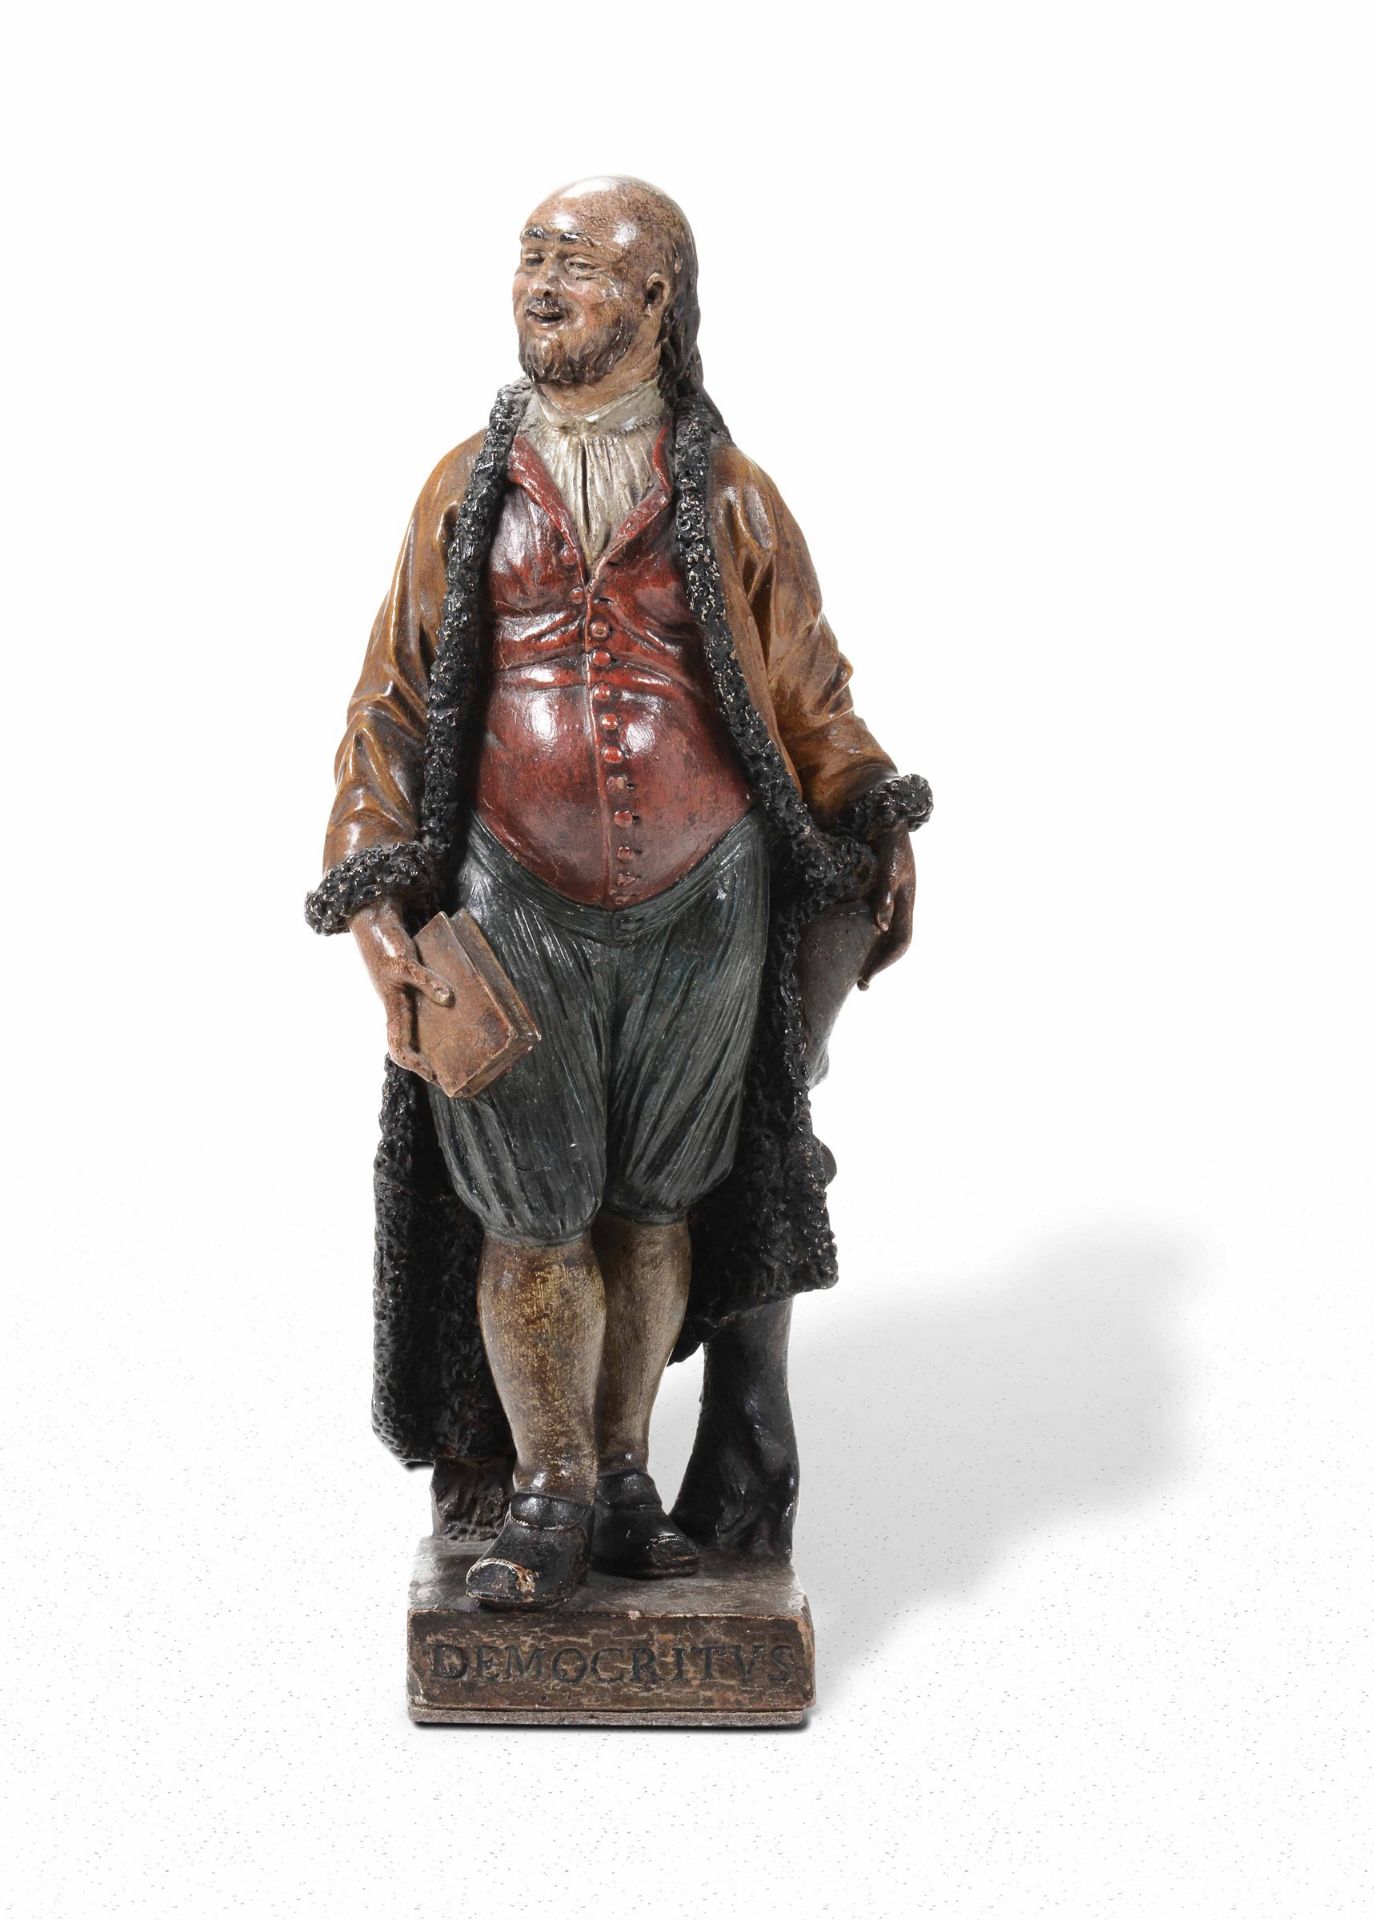 A terracotta Democritus, Germany, late 1700s - Painted terracotta. H 38.5 - [...]